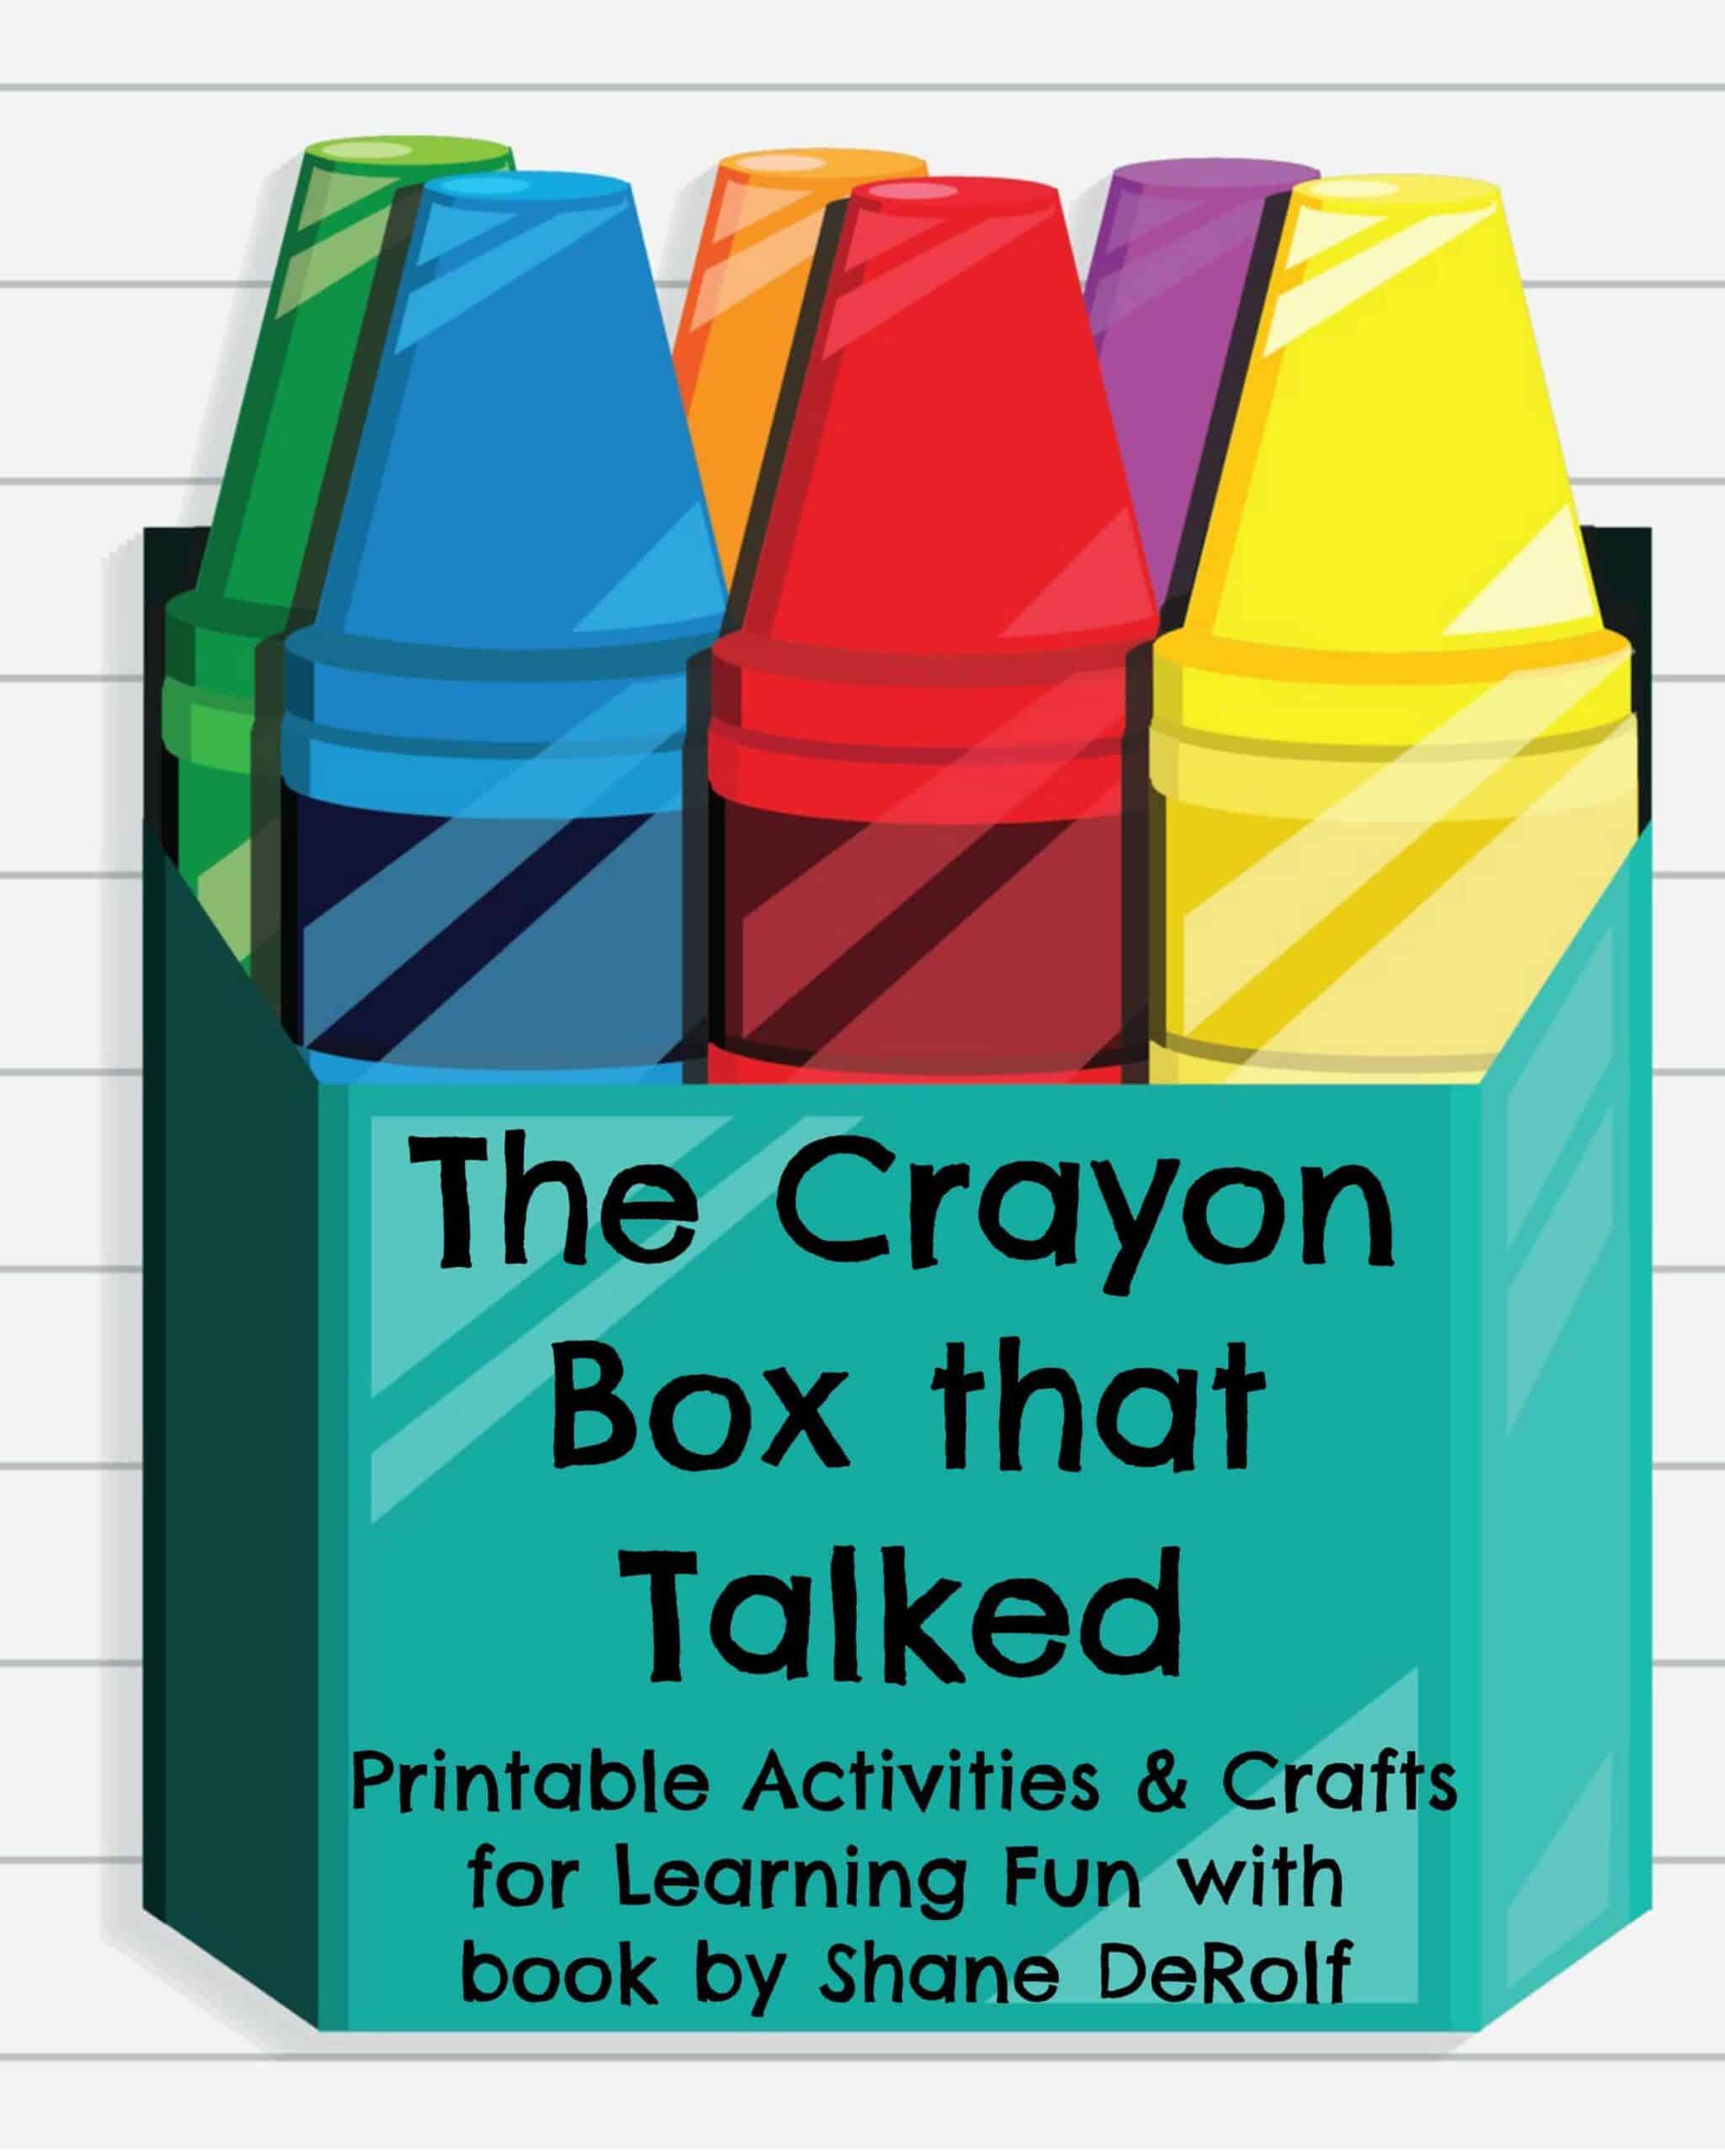 https://rockyourhomeschool.net/wp-content/uploads/2016/05/The-Crayon-Box-that-Talked-cover-scaled.jpg